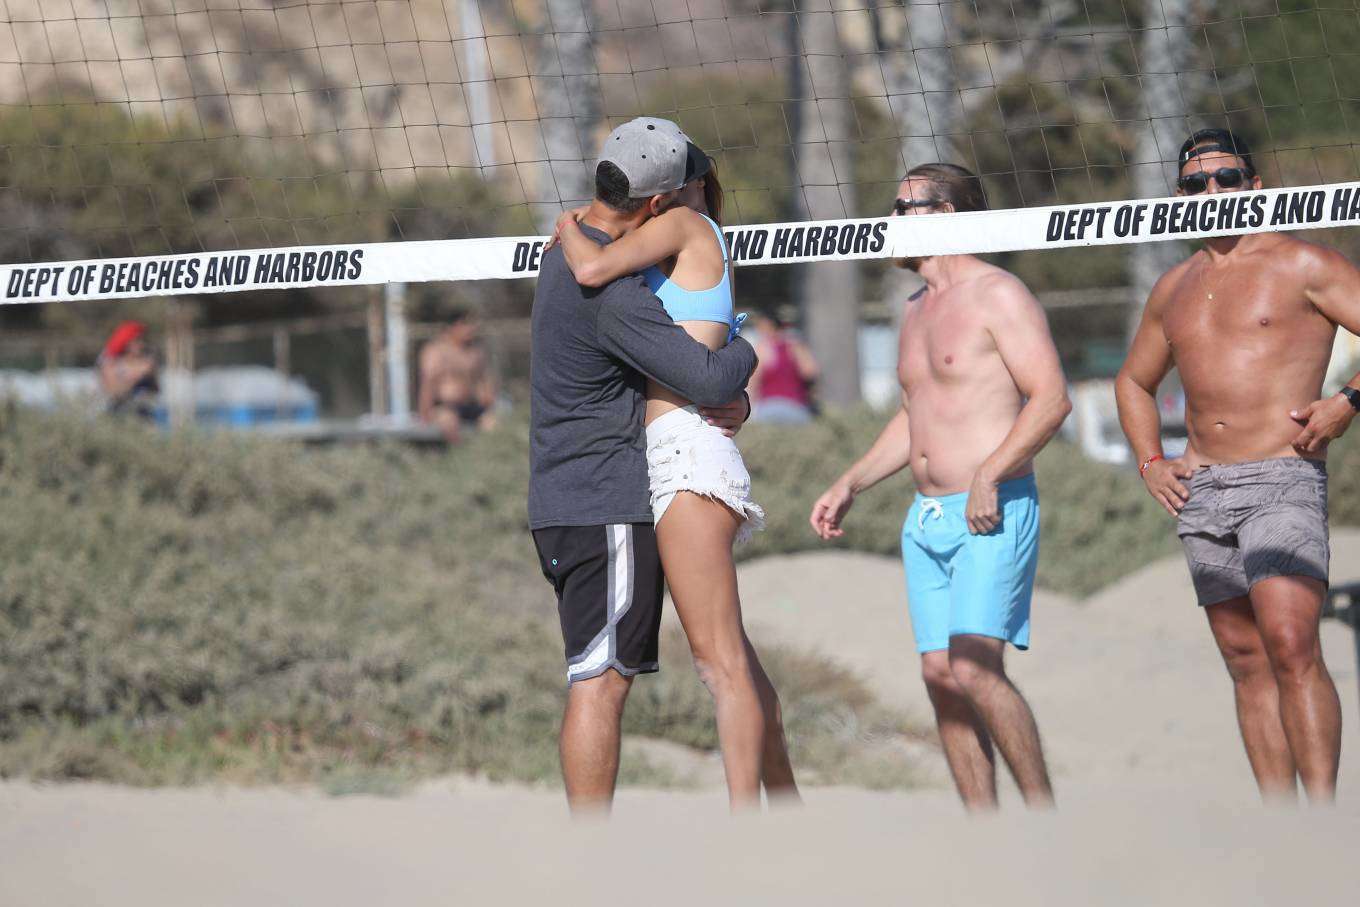 Alessandra Ambrosio Playing Beach Volleyball in Bikini Top and Shorts in Los Angeles